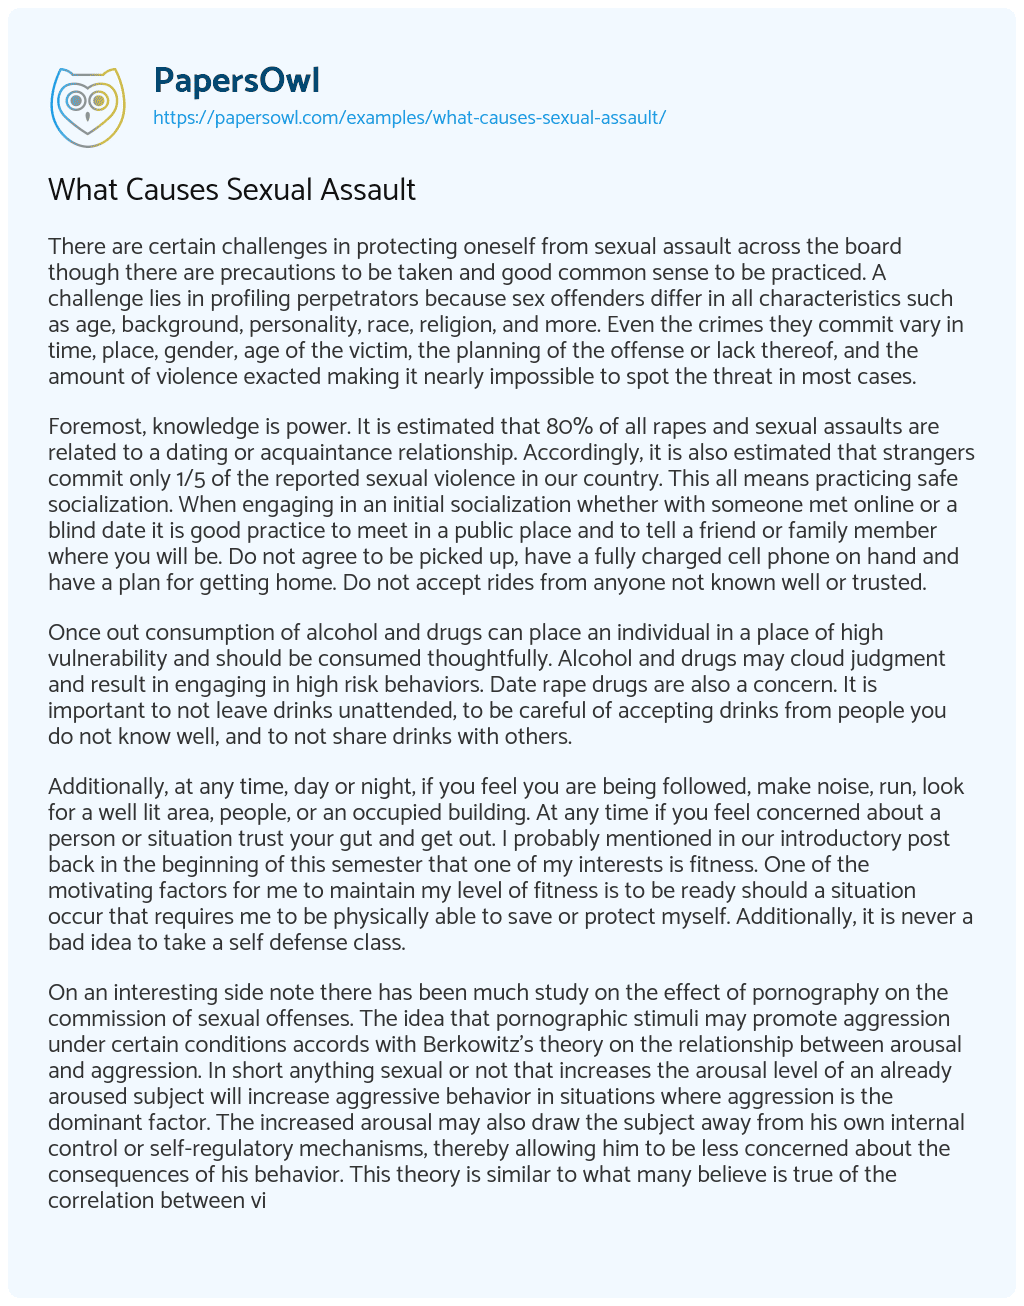 What Causes Sexual Assault essay